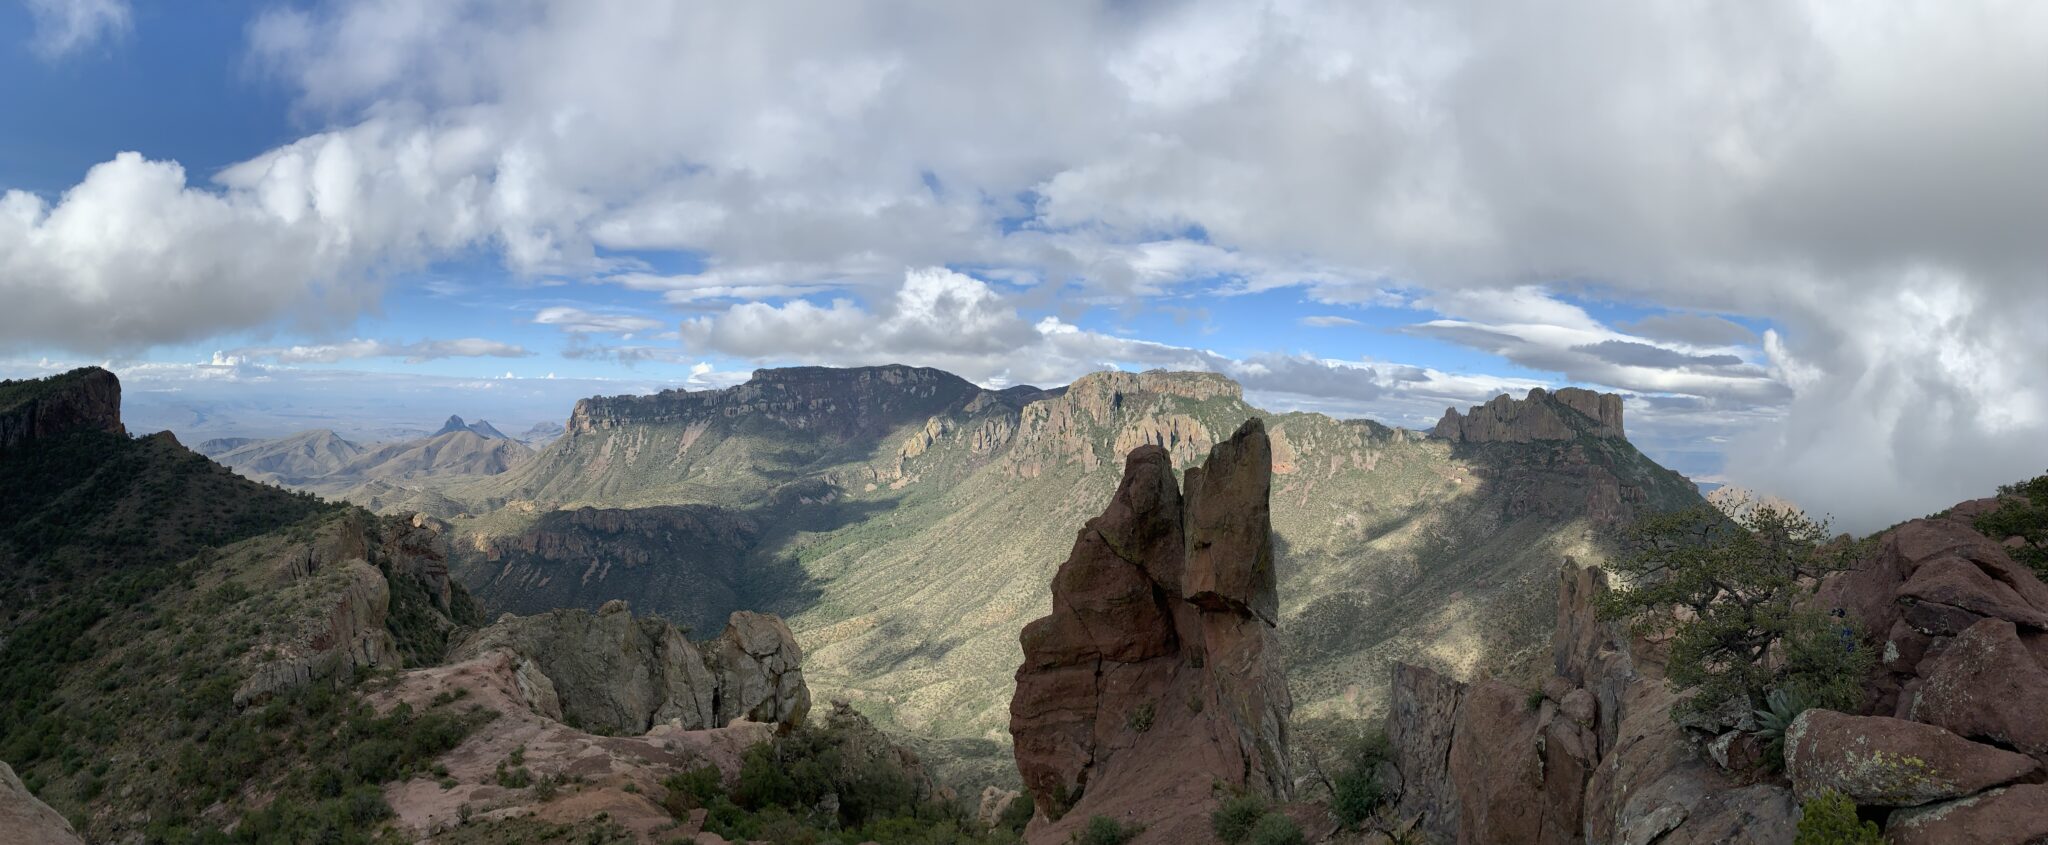 Panormaic view of mountains and clouds